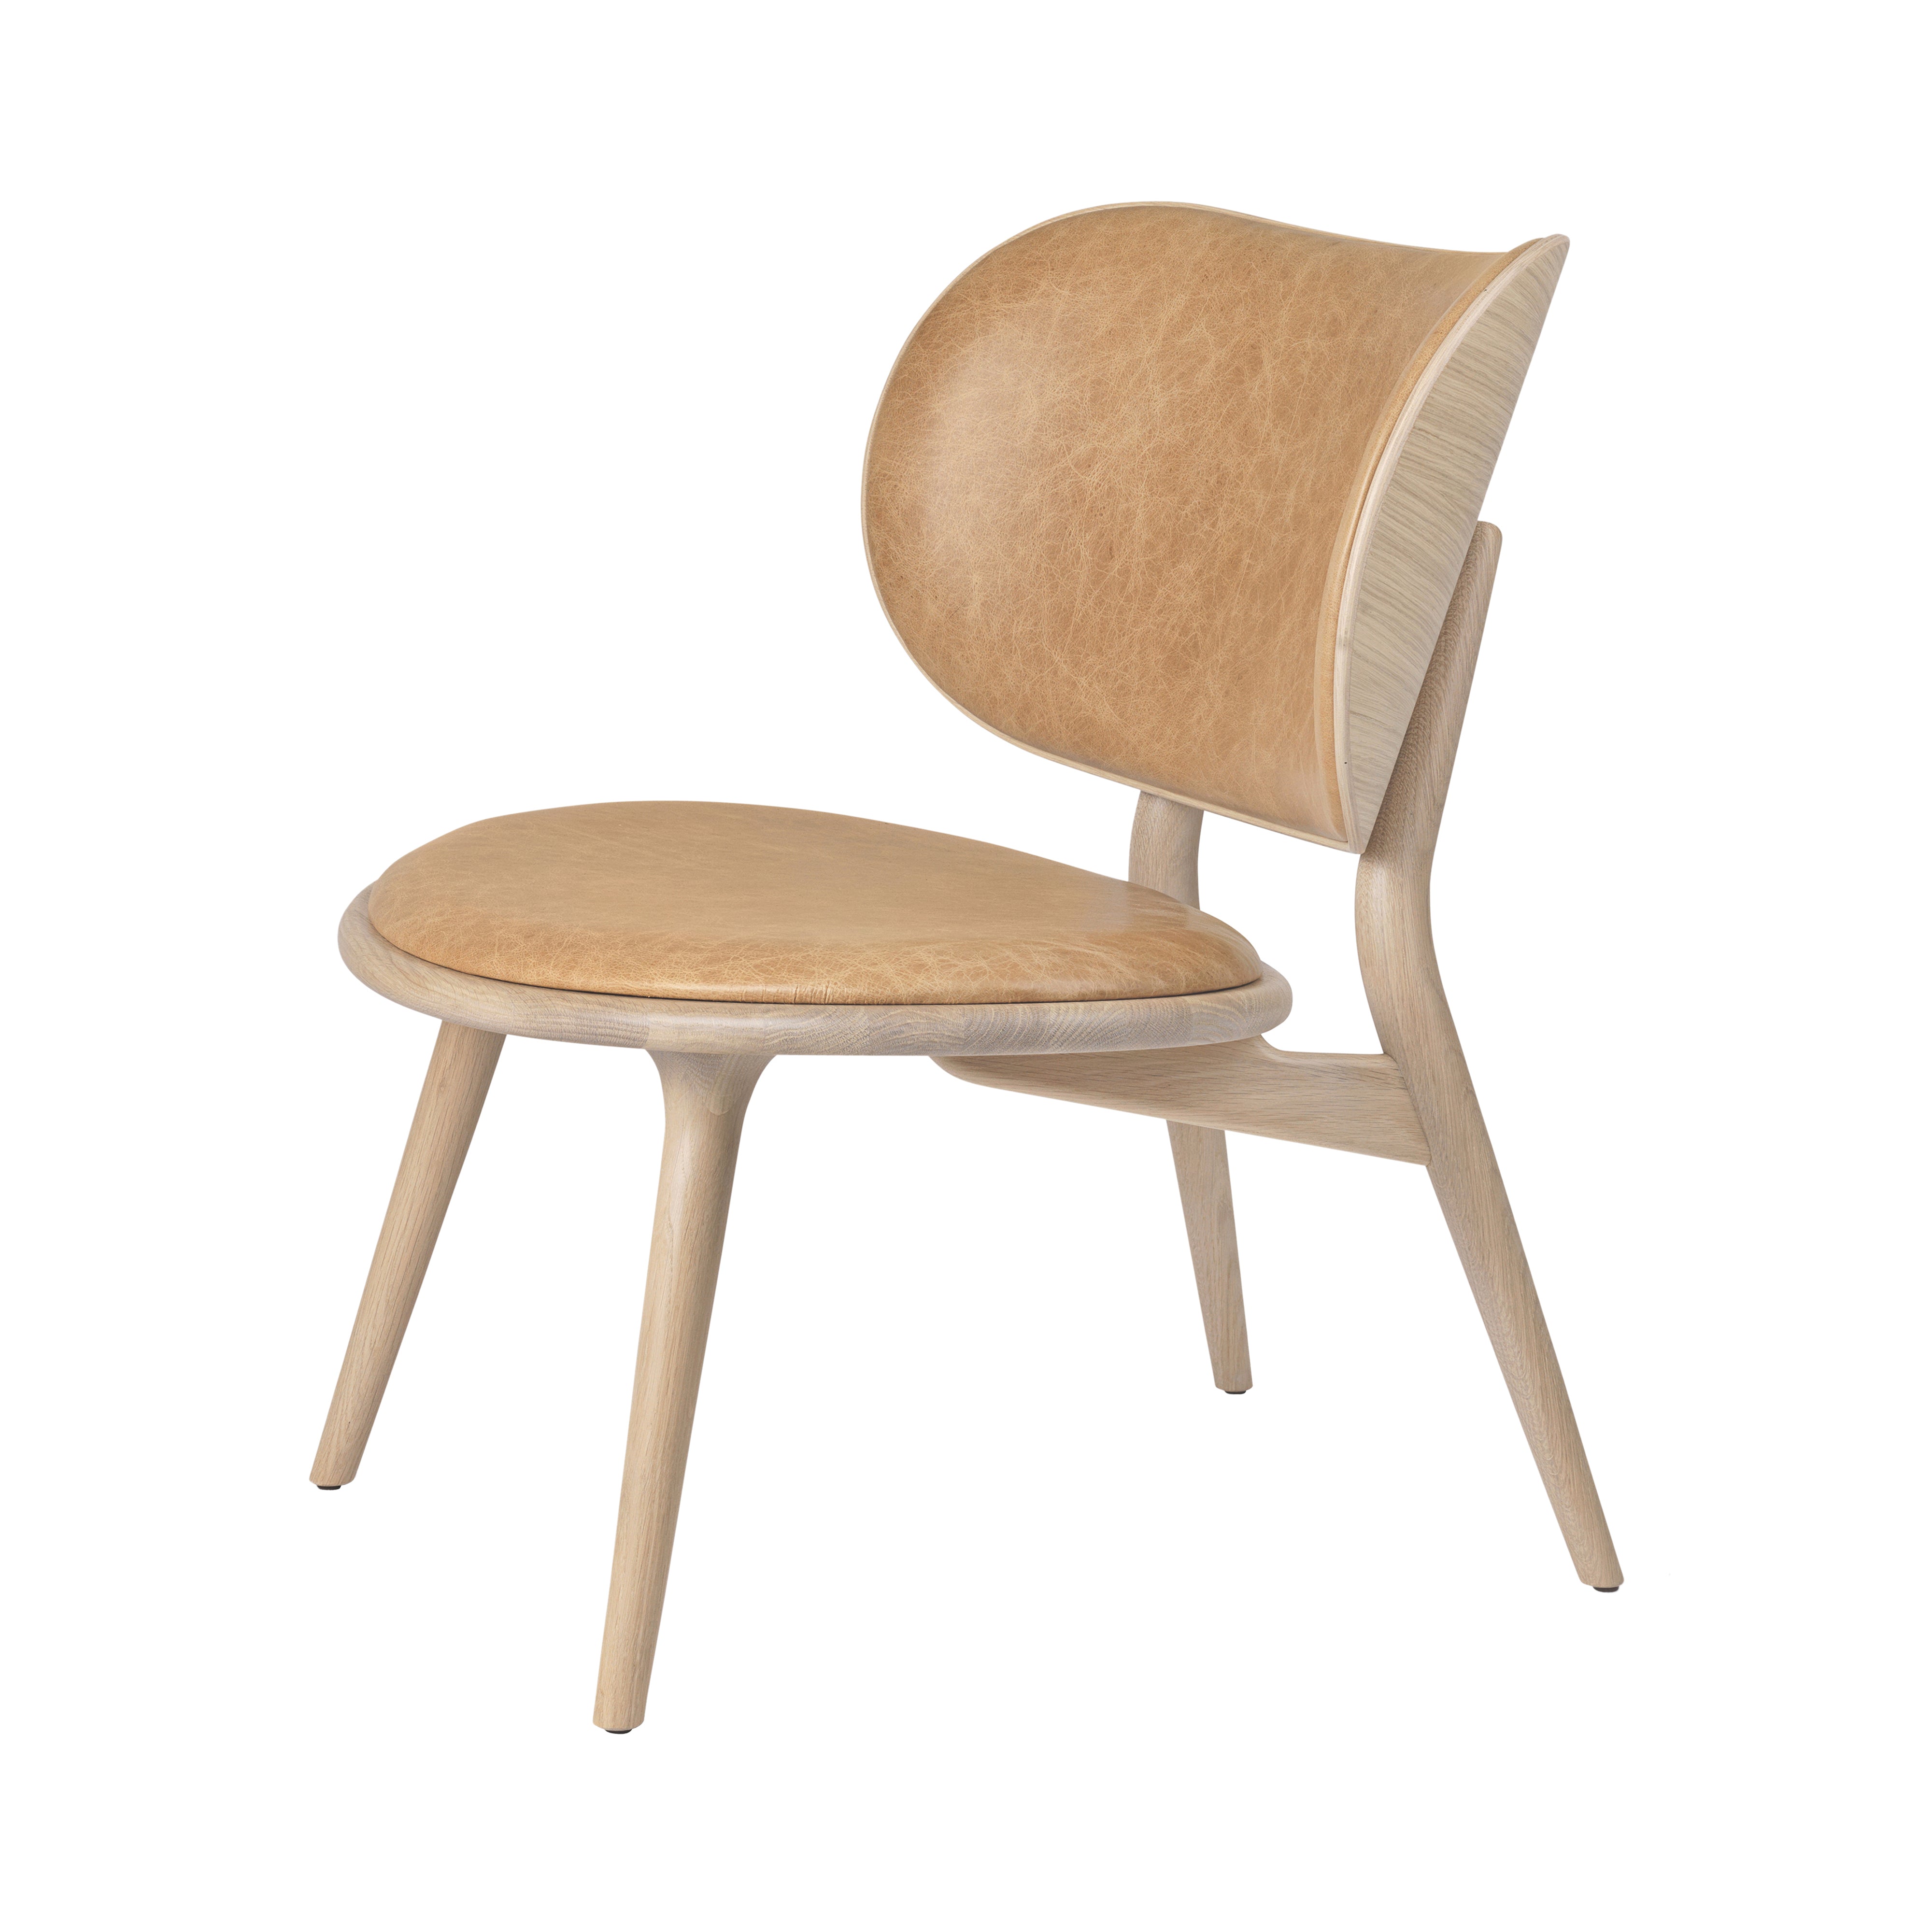 The Lounge Chair: Matt Lacquered Oak + Natural Tanned Leather